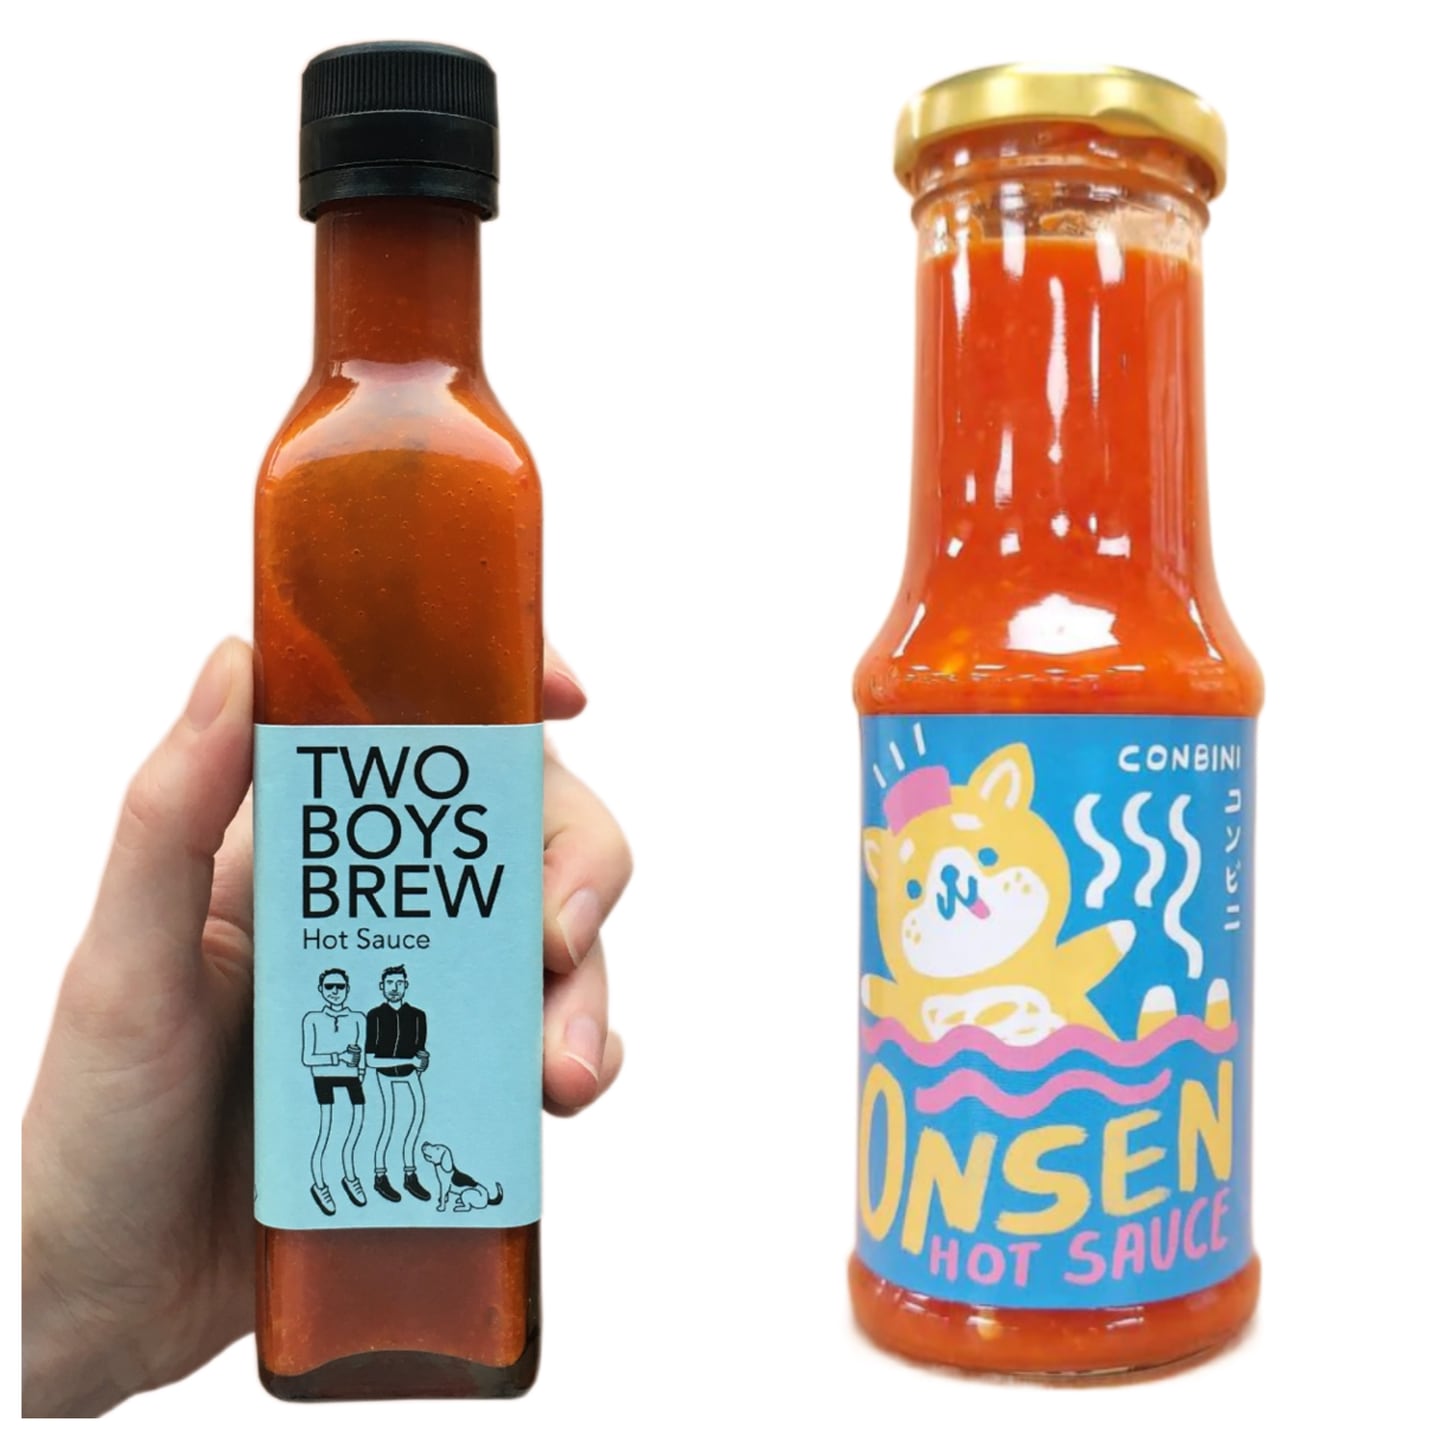 Two guys brew hot sauce and onsen hot sauce